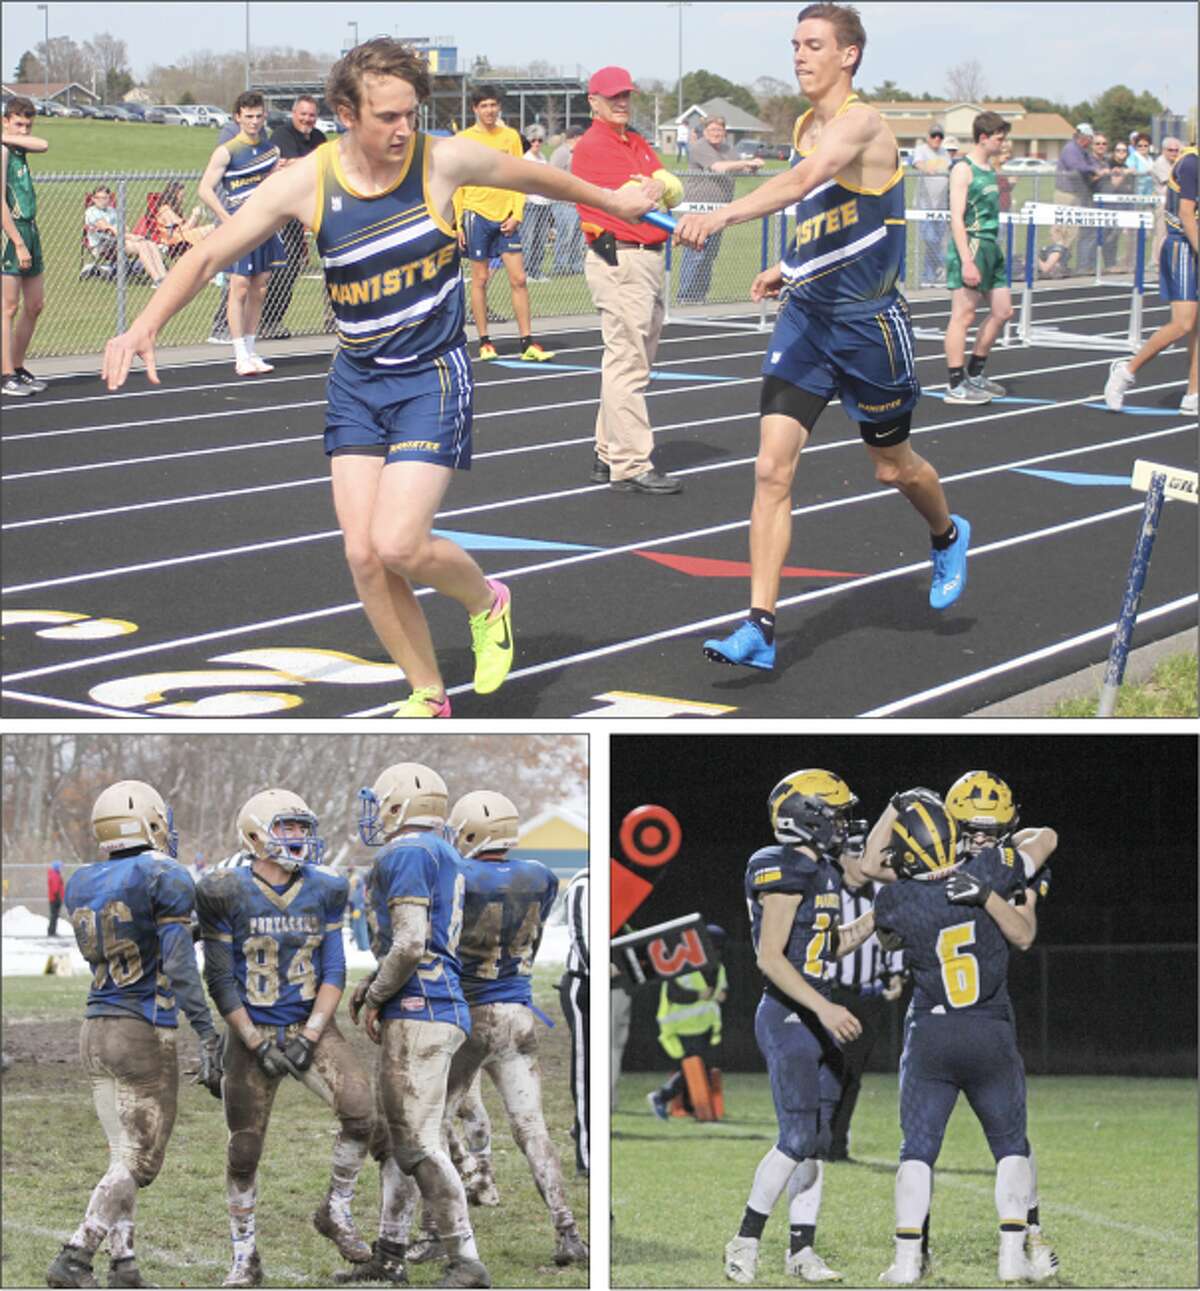 Pictured (clockwise from top): Manistee High School debuted its long awaited home track in May of 2018; The Manistee Chippewa football team capped a perfect 9-0 regular season; The Onekama Portager football team made it all the way to the 8-player Division 2 state championship in the fall. (News Advocate file photos)